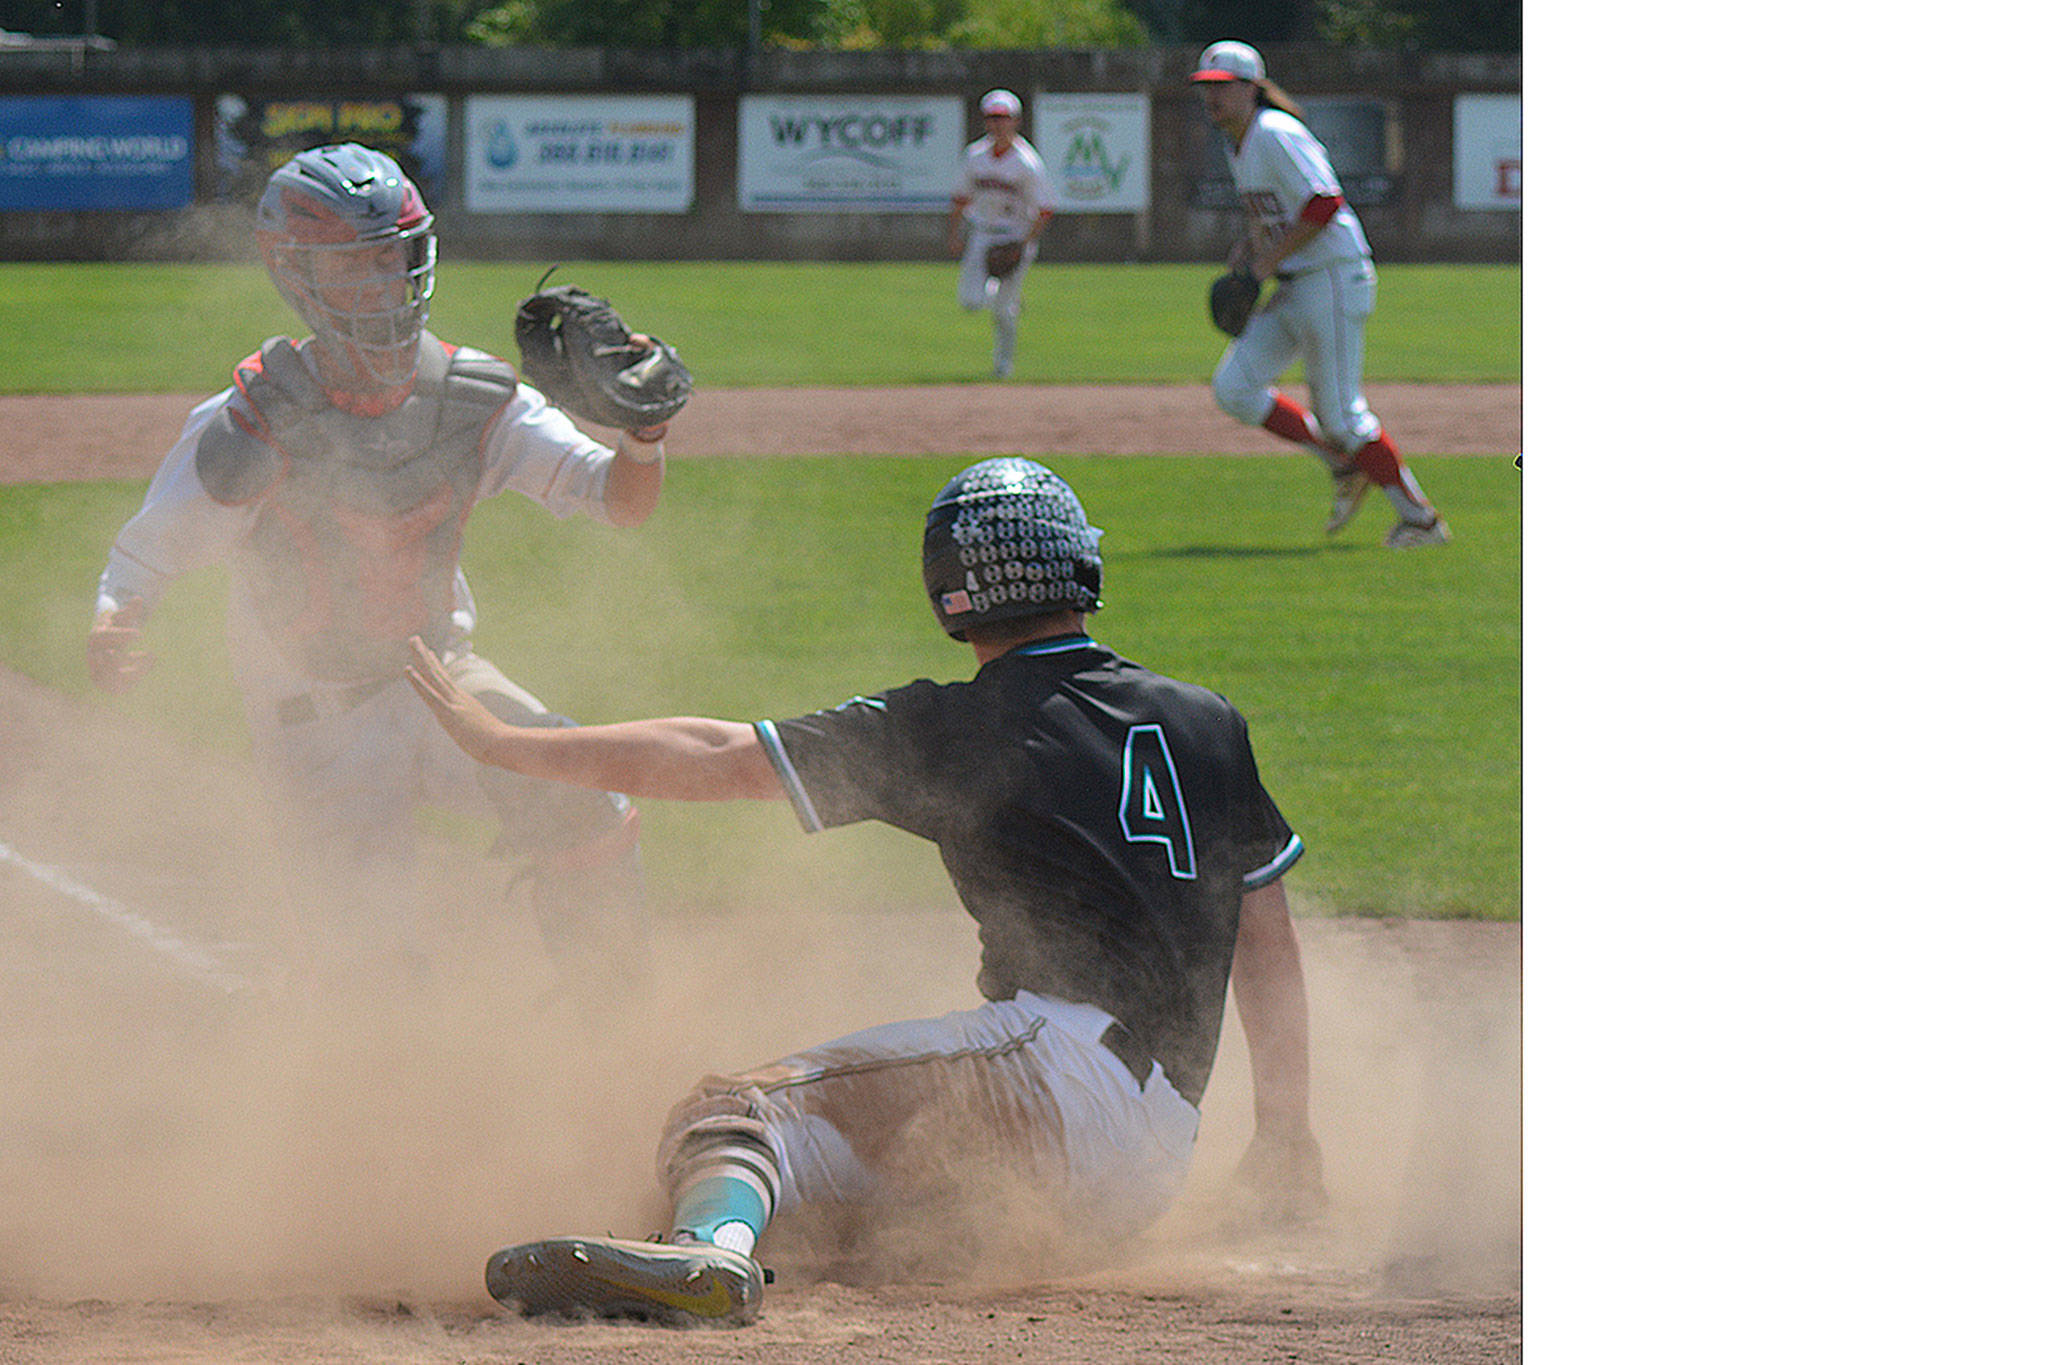 M-P, Arlington knocked out of state baseball playoffs (slide show)